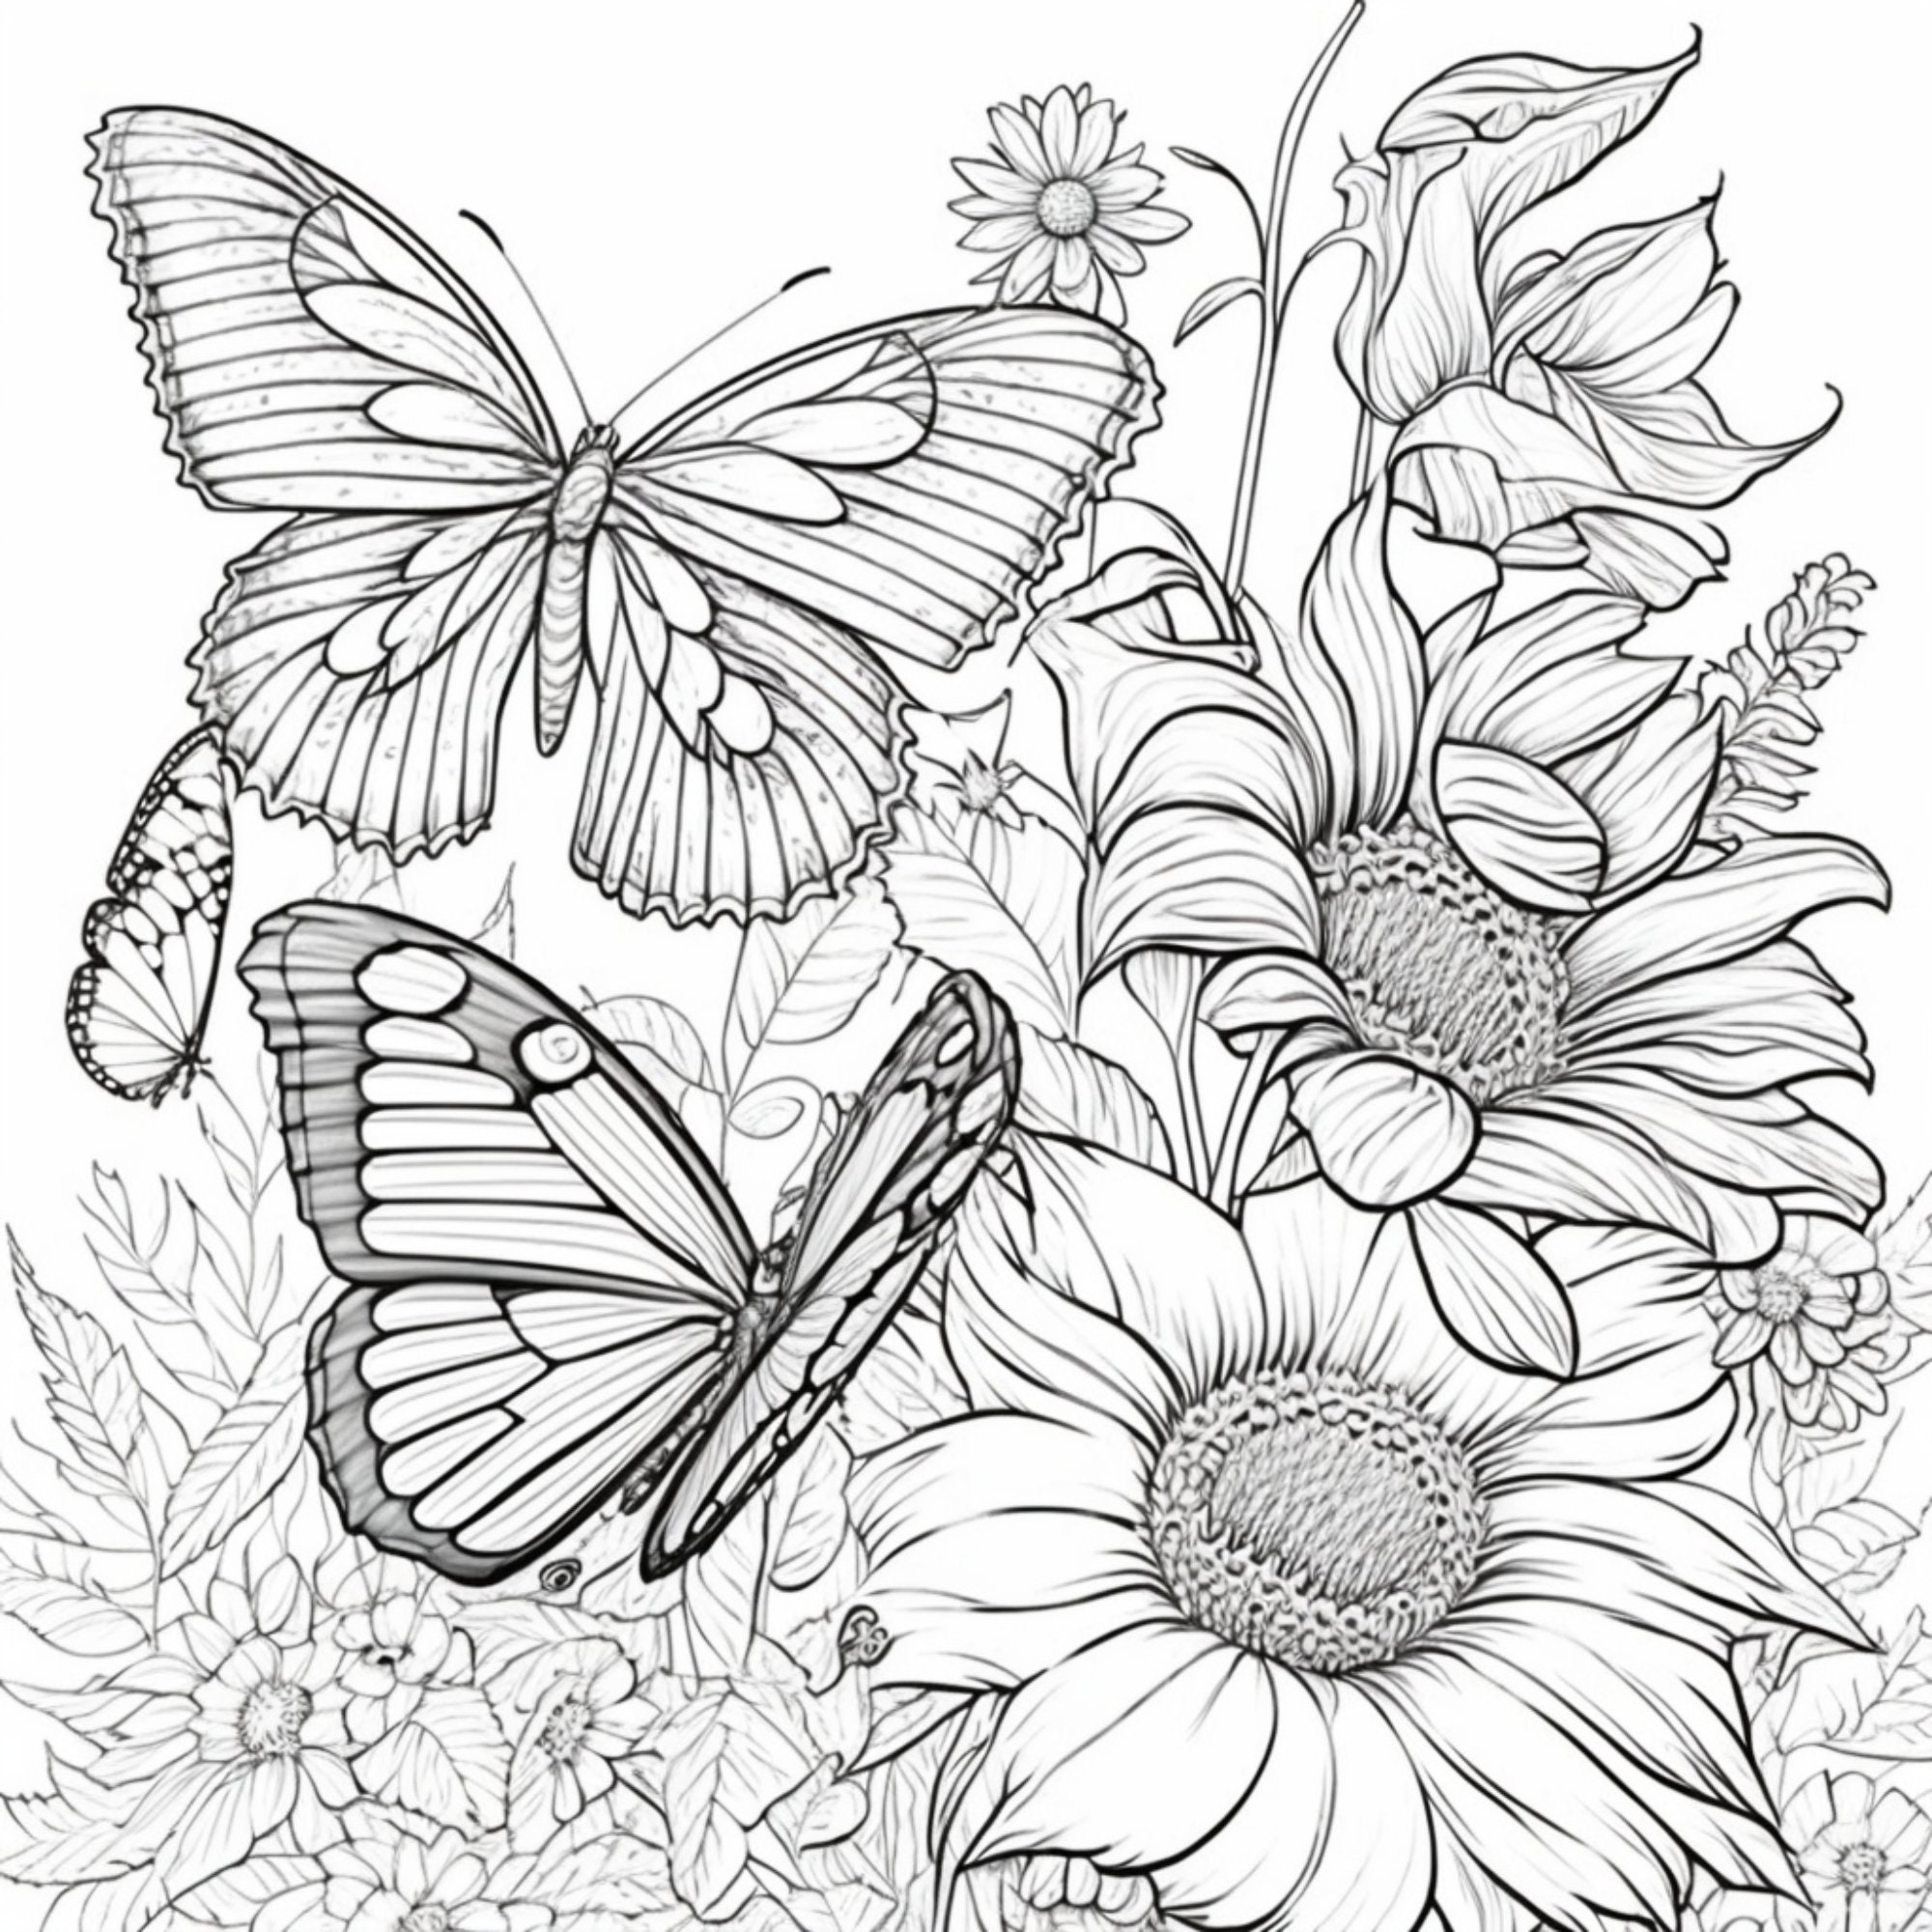 Printable flowers and butterflies coloring pages for kids and adults digital download pdf instant download